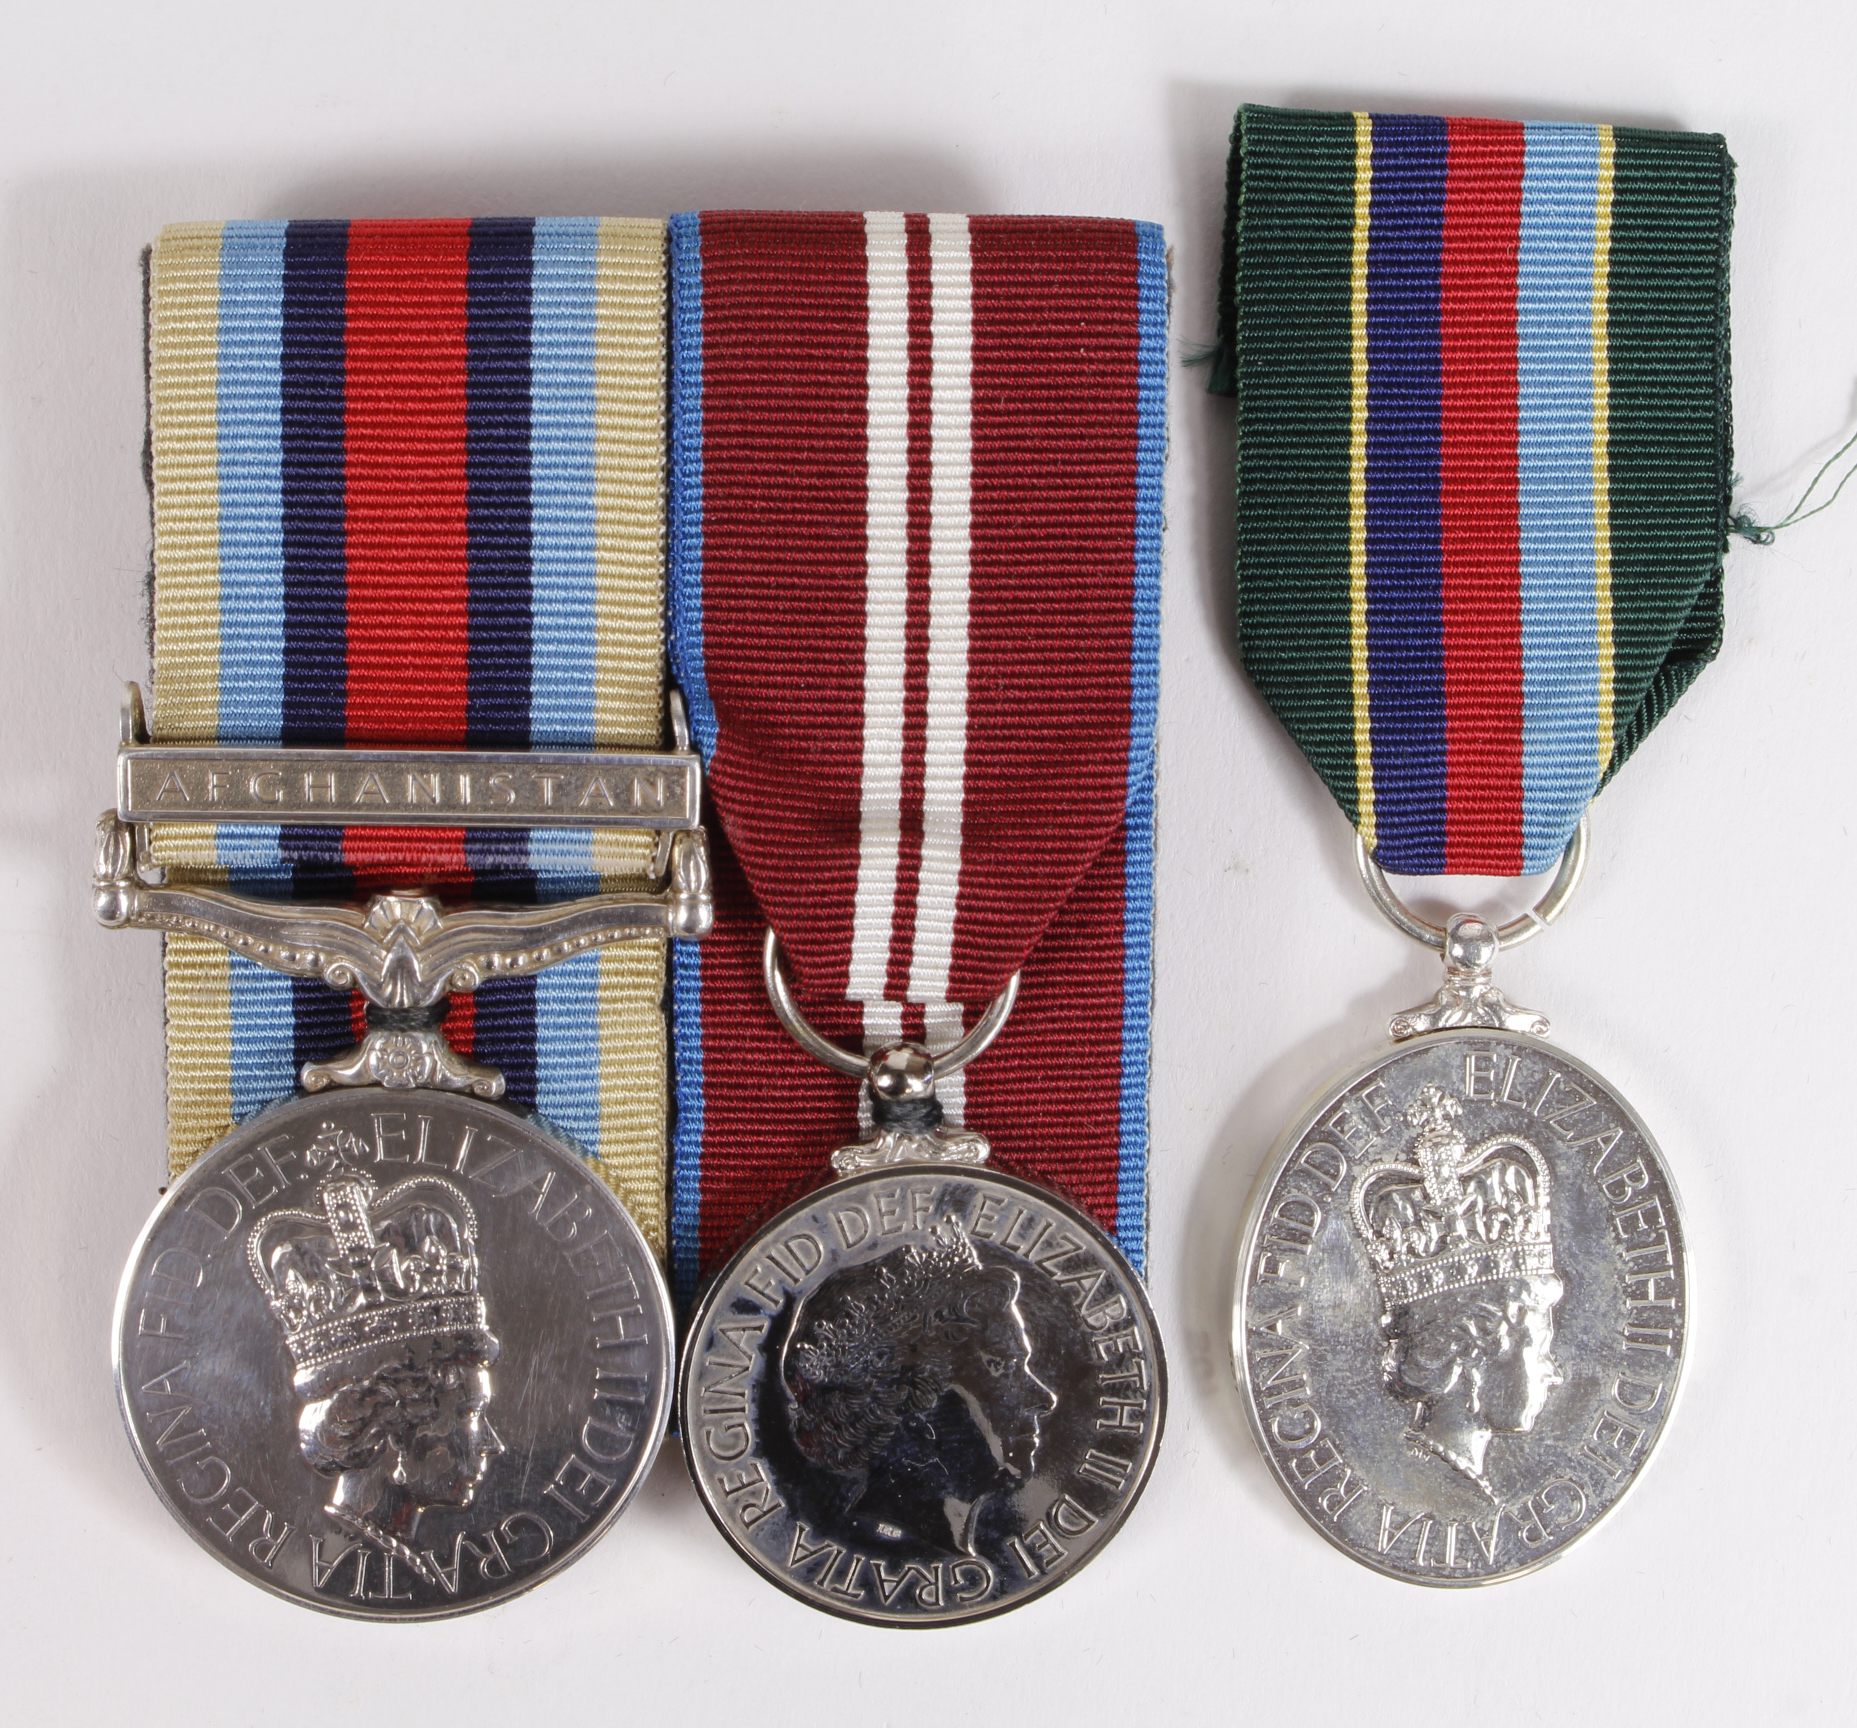 Group - Operational Service Medal for Afghanistan (25230998 Airtpr G D J Rundle AAC), Volunteer